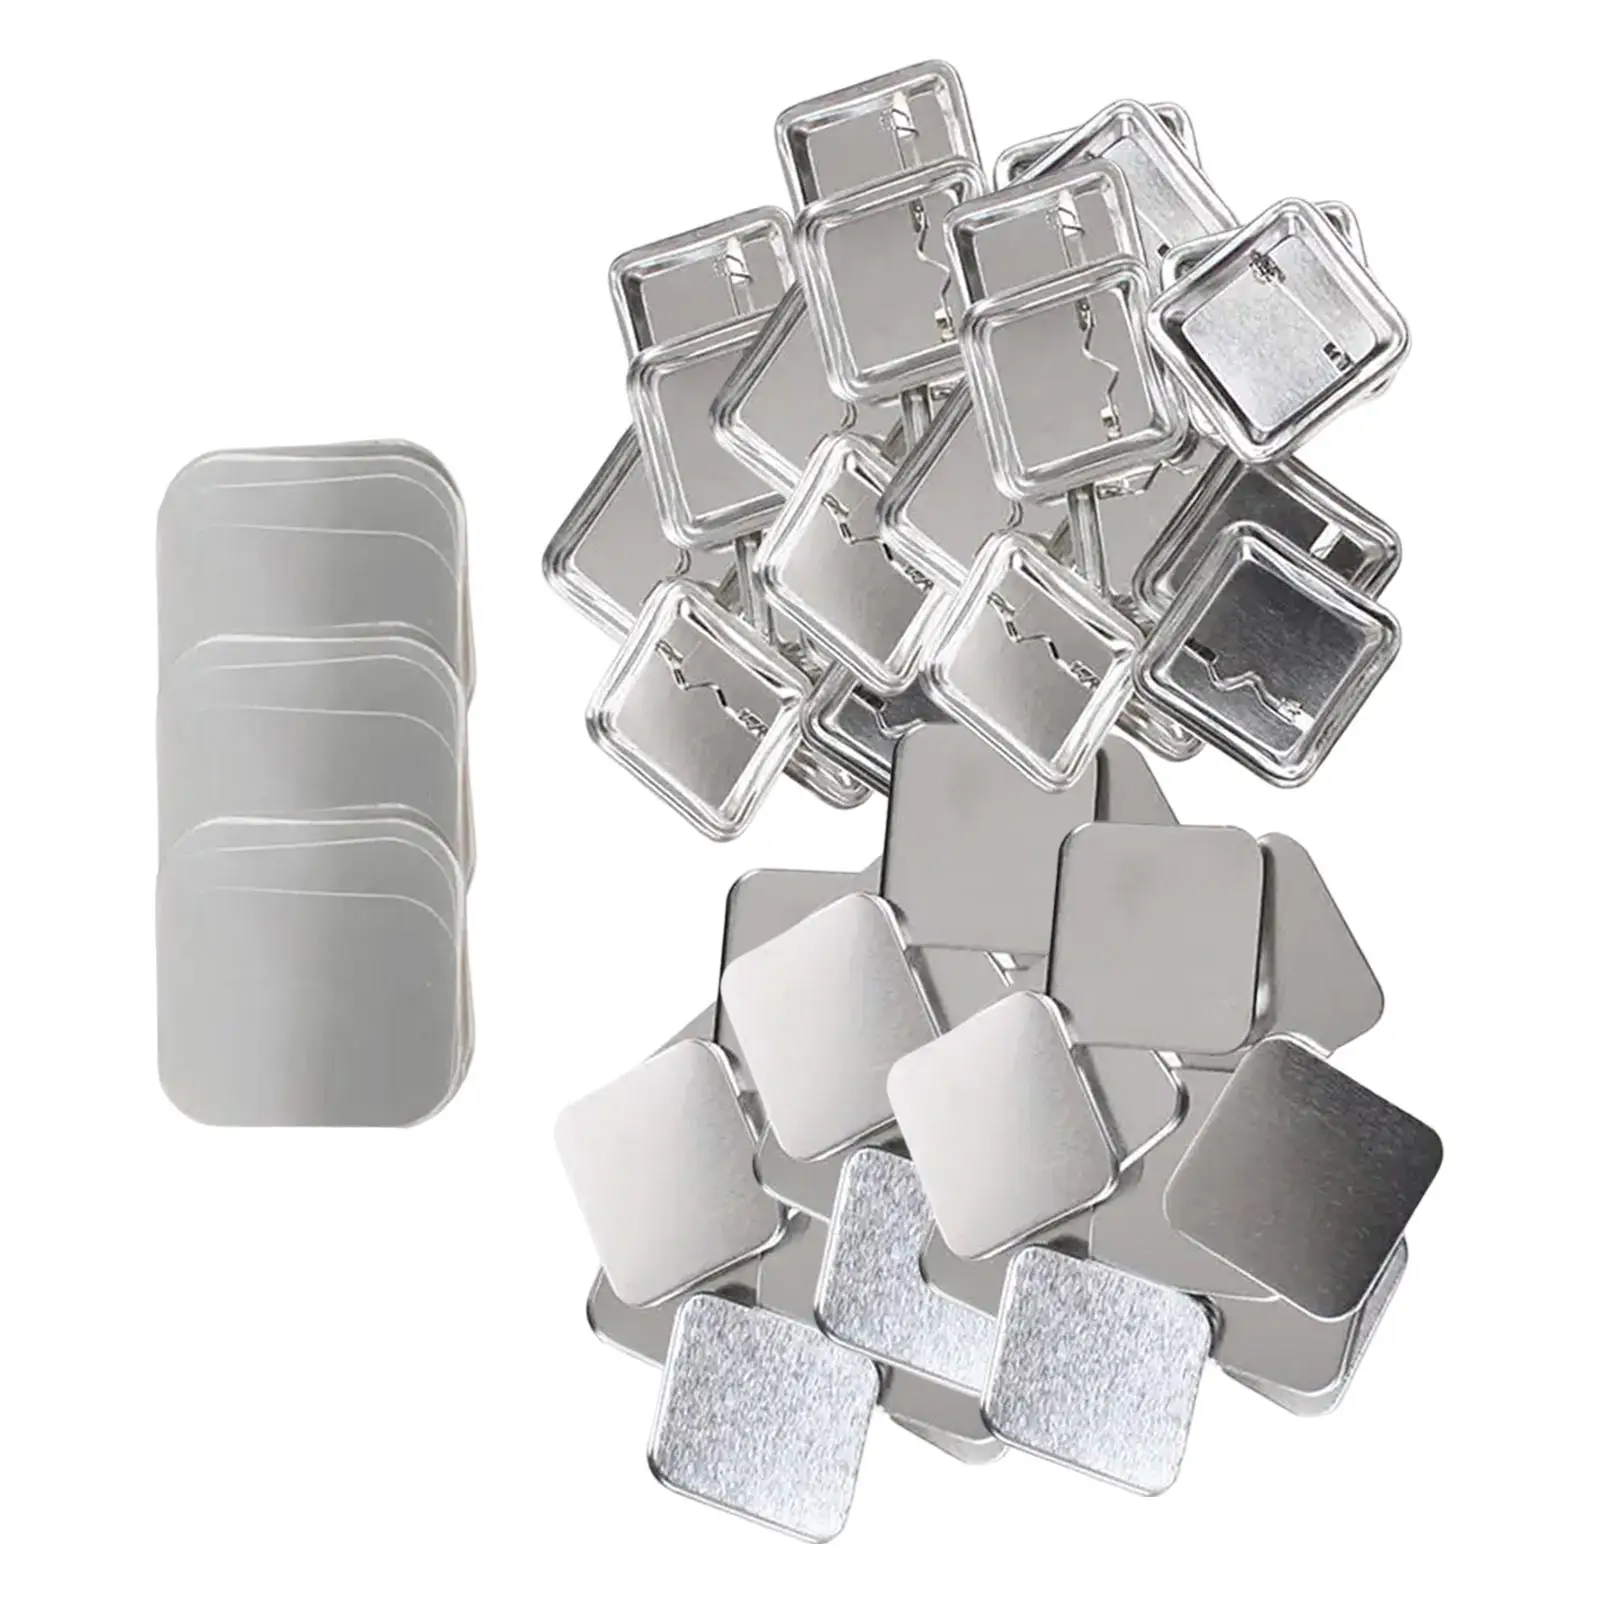 100Sets Blank Button Badge Parts Clear Mylar Square Shape Component Metal Button Material Badge Kit for DIY Gifts Crafting